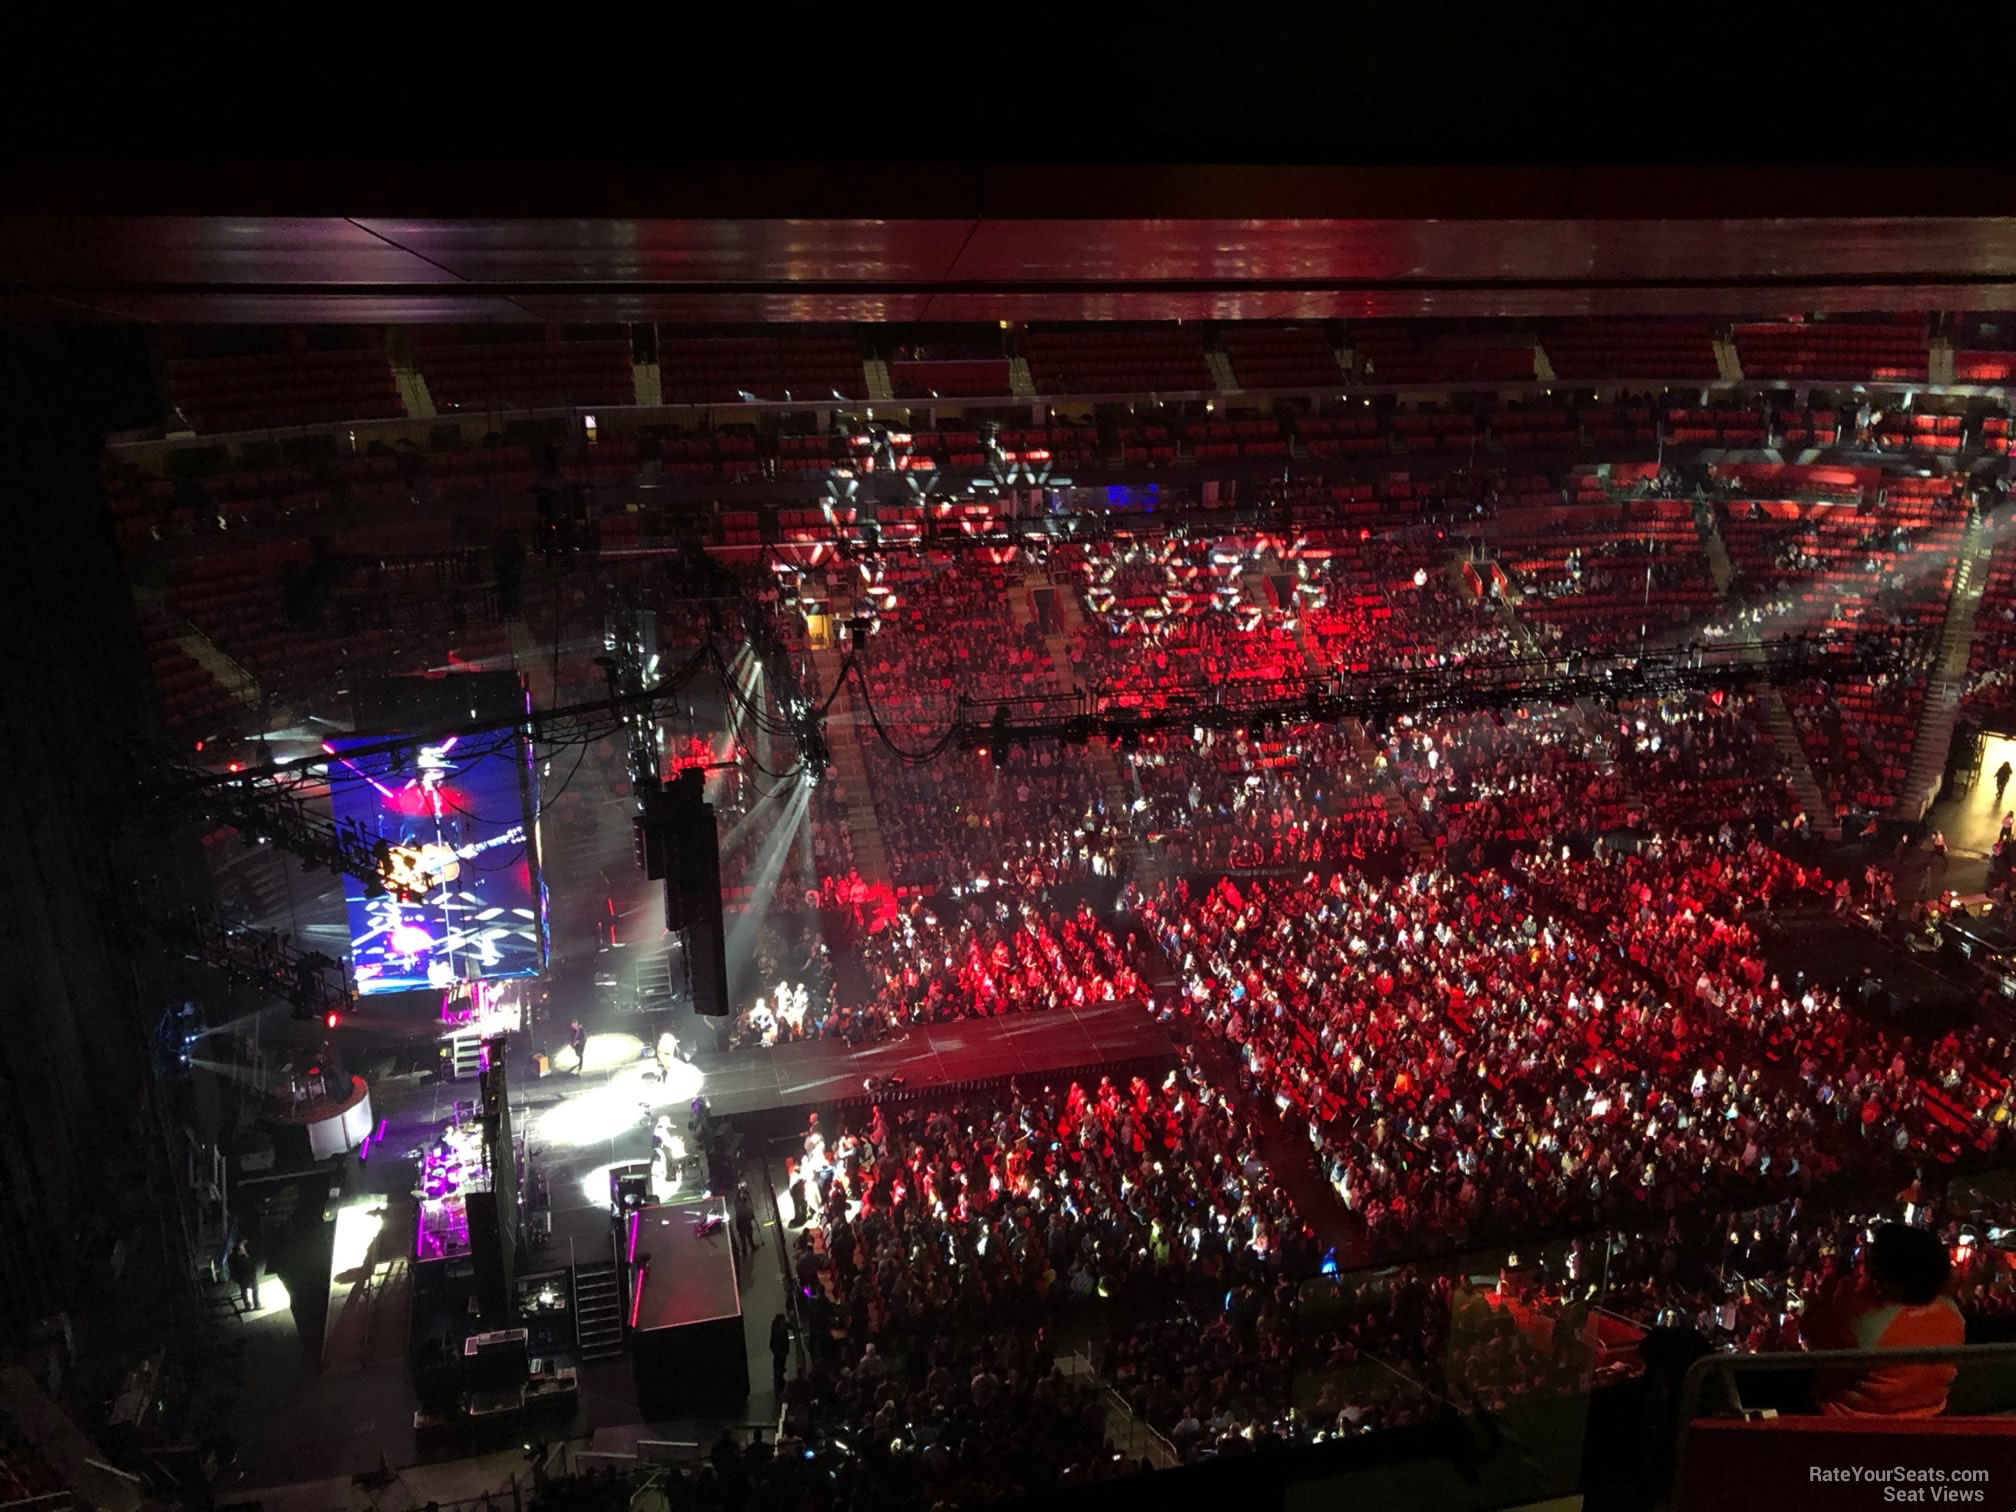 section 229, row 7 seat view  for concert - little caesars arena